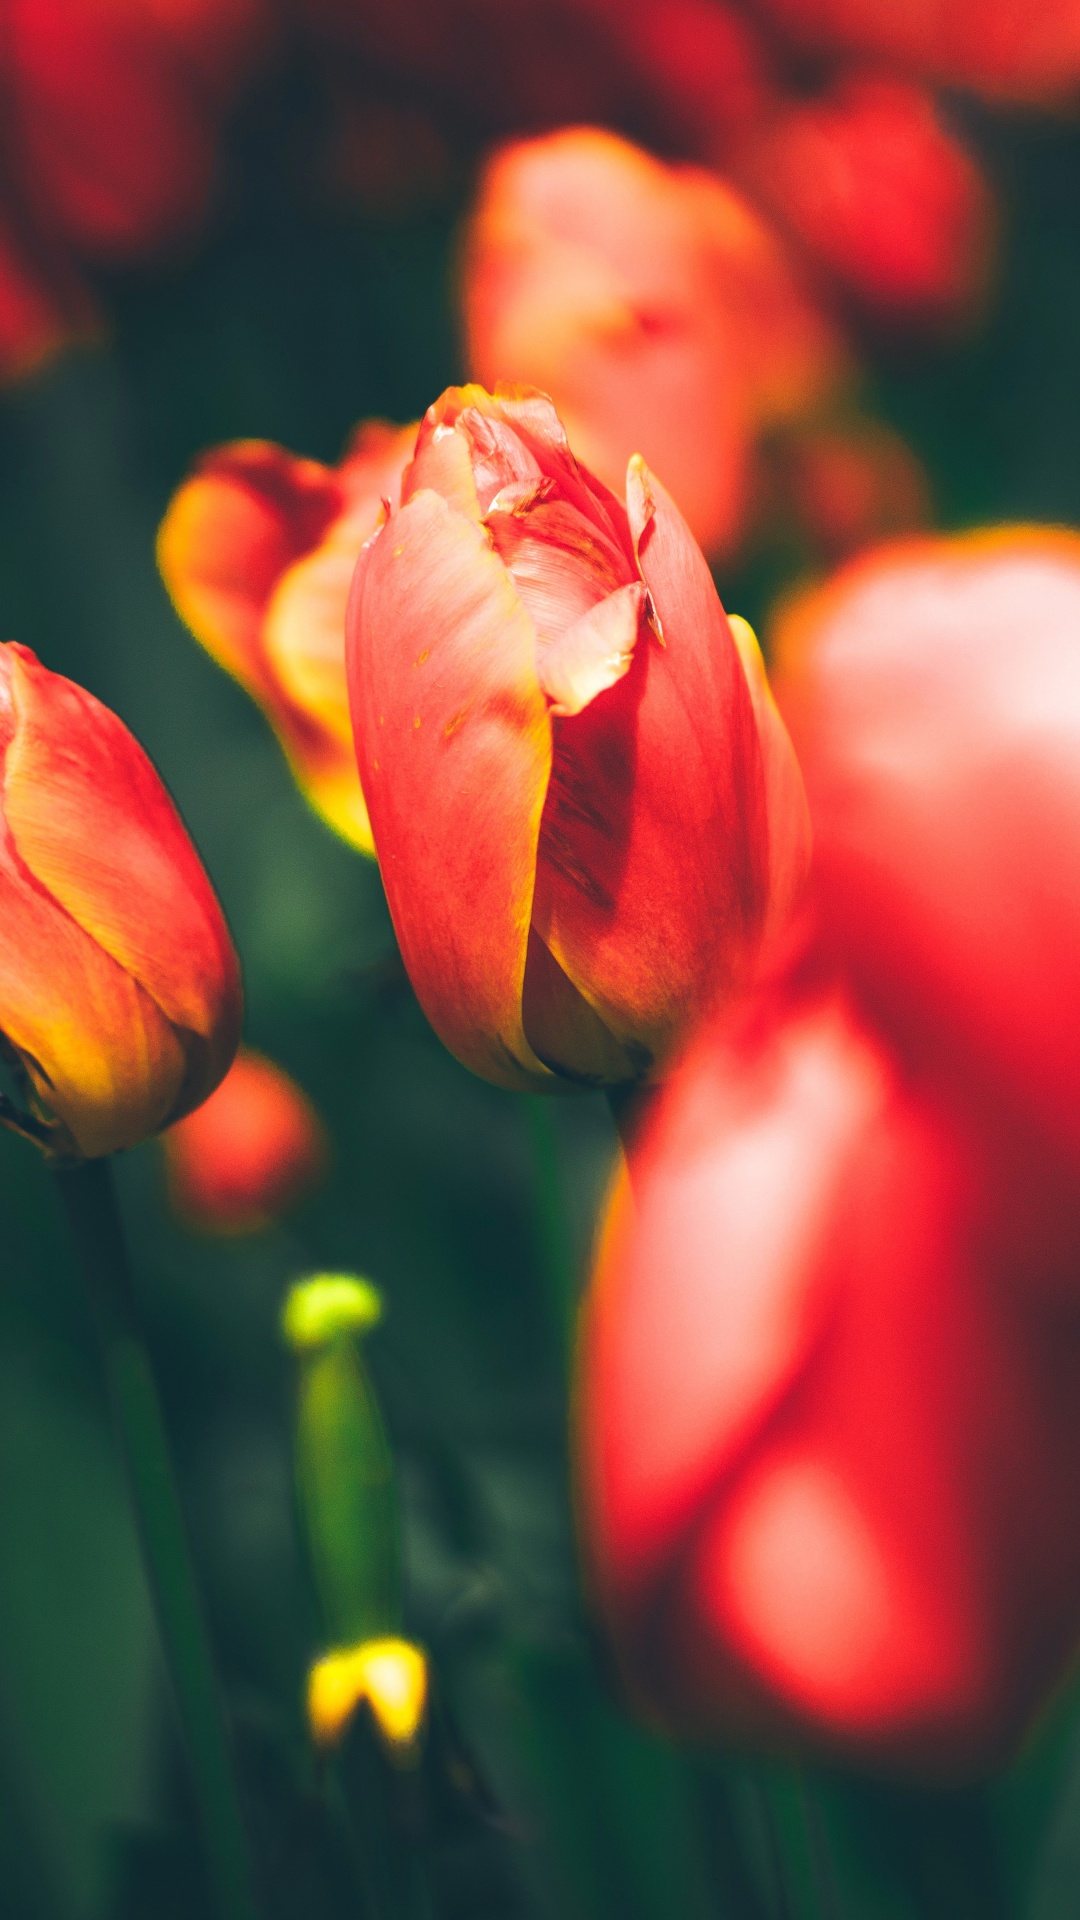 Red Tulips in Bloom During Daytime. Wallpaper in 1080x1920 Resolution